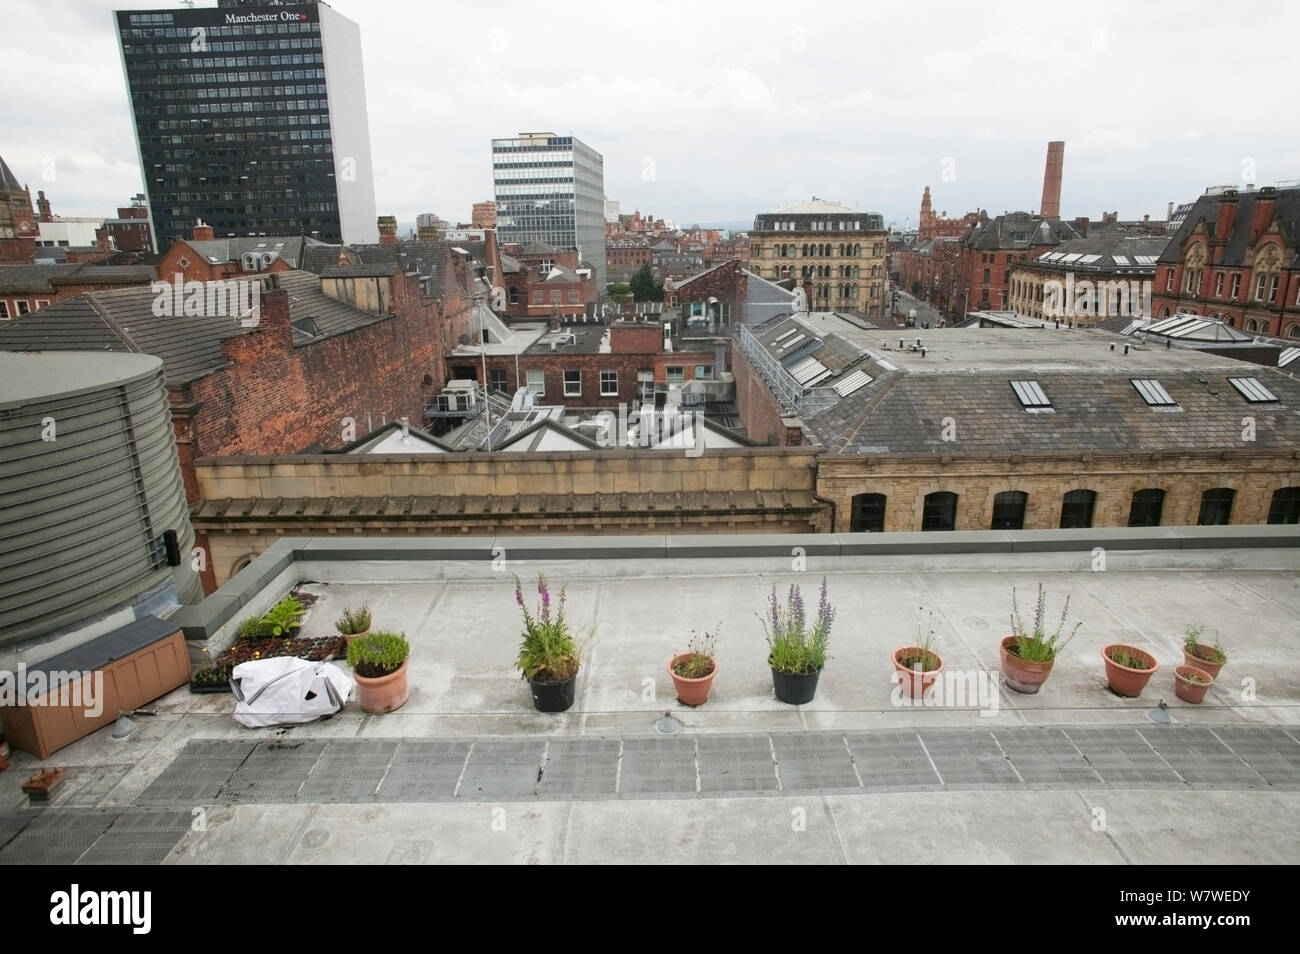 Pots of Vipers bugloss (Echium vulgare) and Chives (Allium schoenoprasum) on urban roof tops to encourage resident honey bees, Manchester Art gallery, England, UK, June 2014. Stock Photo